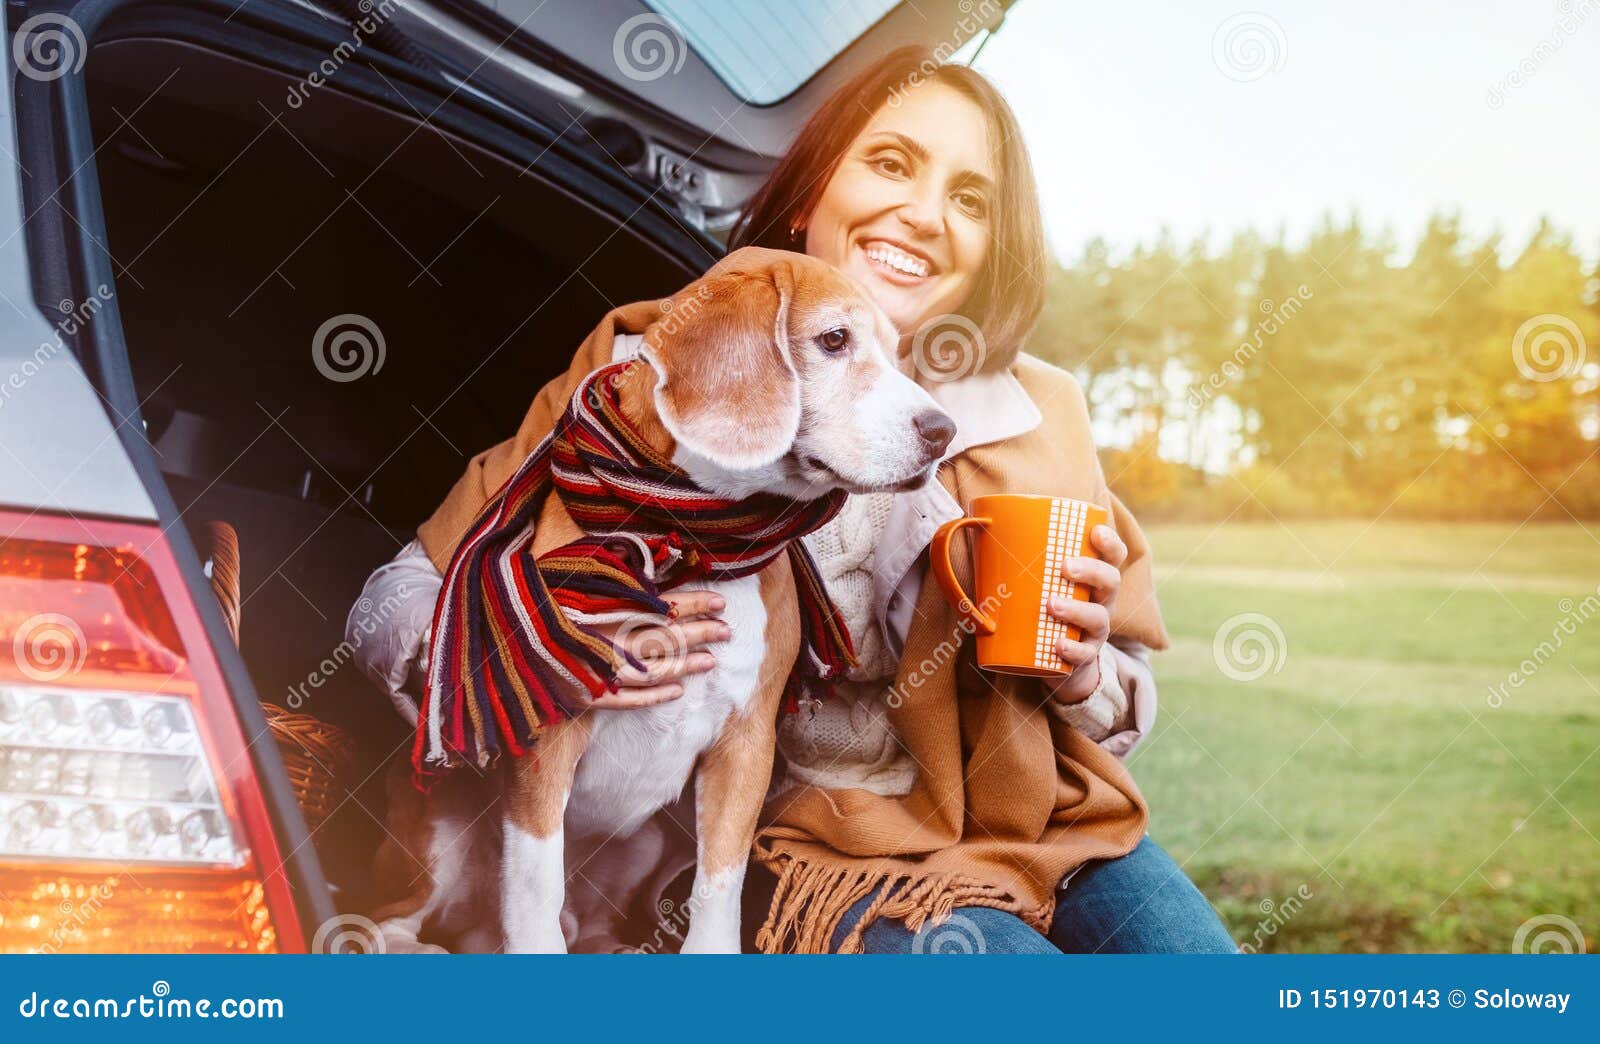 woman with dog sit together in cat truck and warms Ãâ ÃËÃÂµÃâ¬ hot tea. auto travel with pets concept image